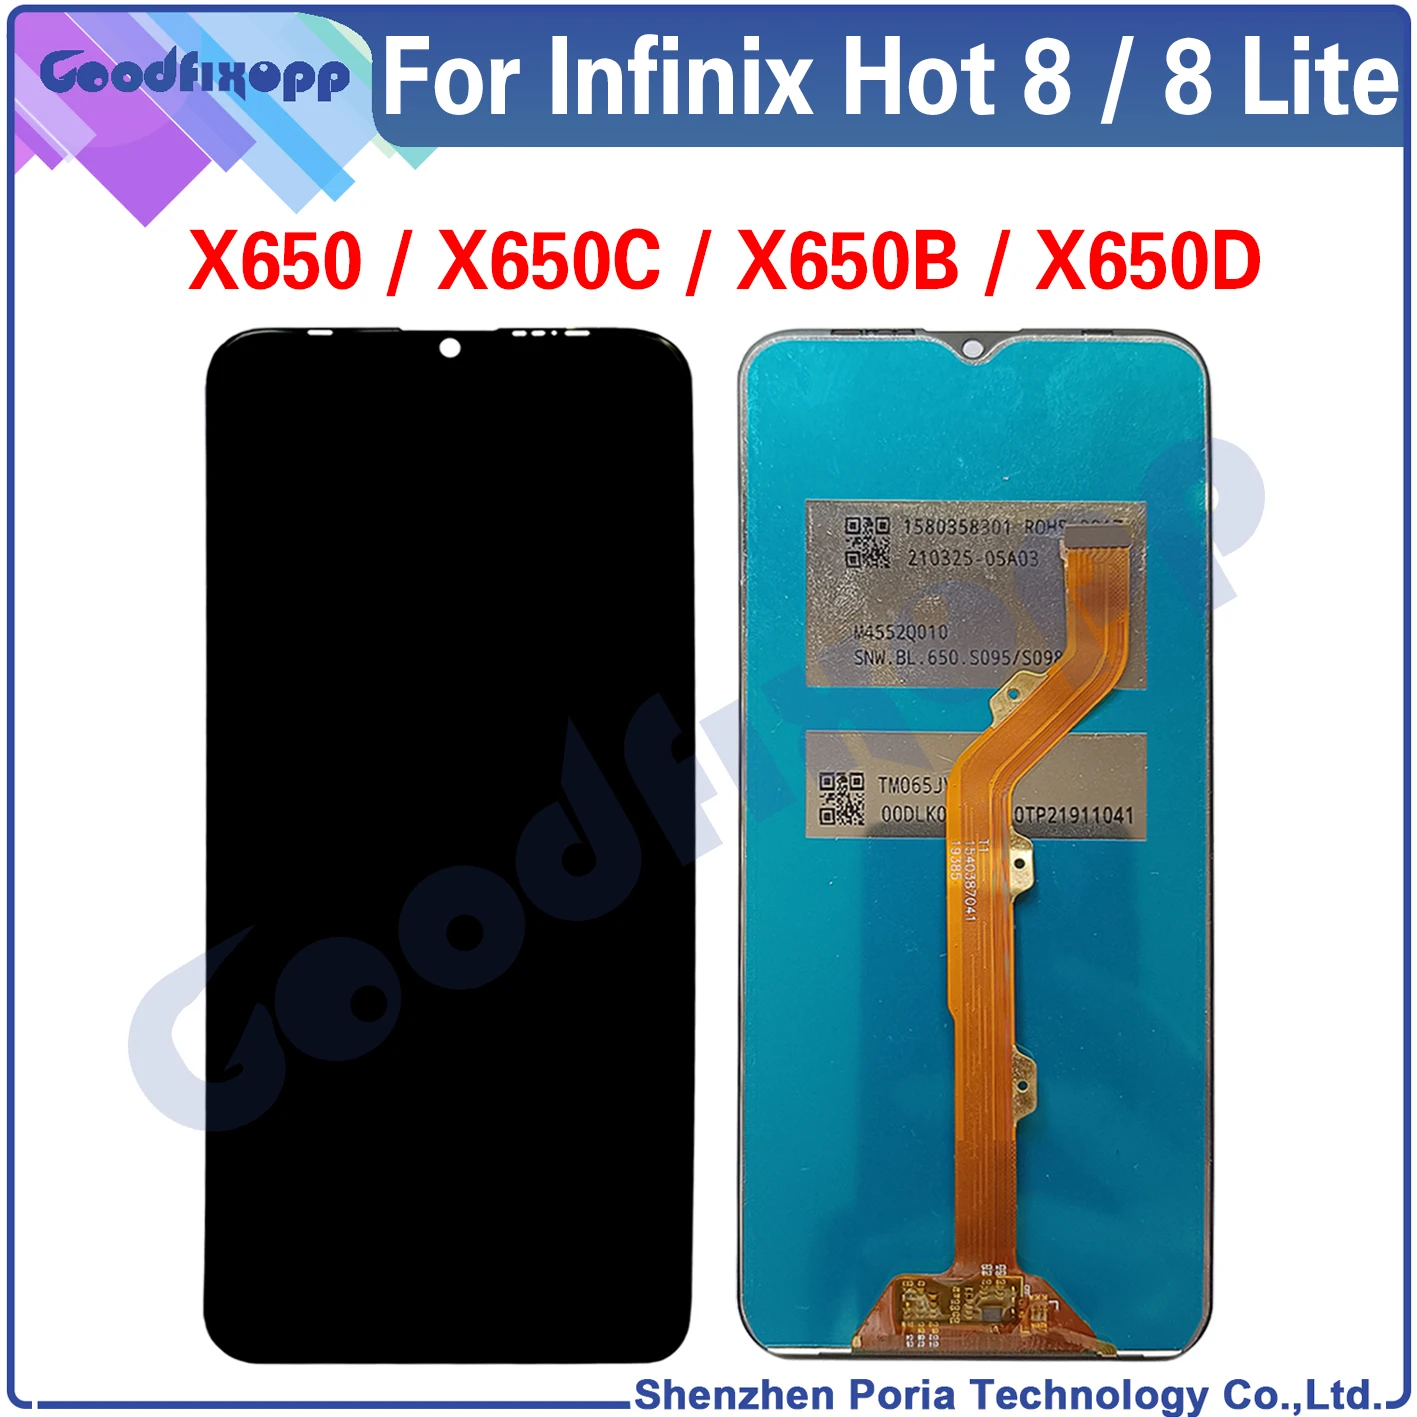 

For Infinix Hot 8 Lite X650 X650C X650B X650D LCD Display Touch Screen Digitizer Assembly For Infinix Hot8 8Lite Replacement